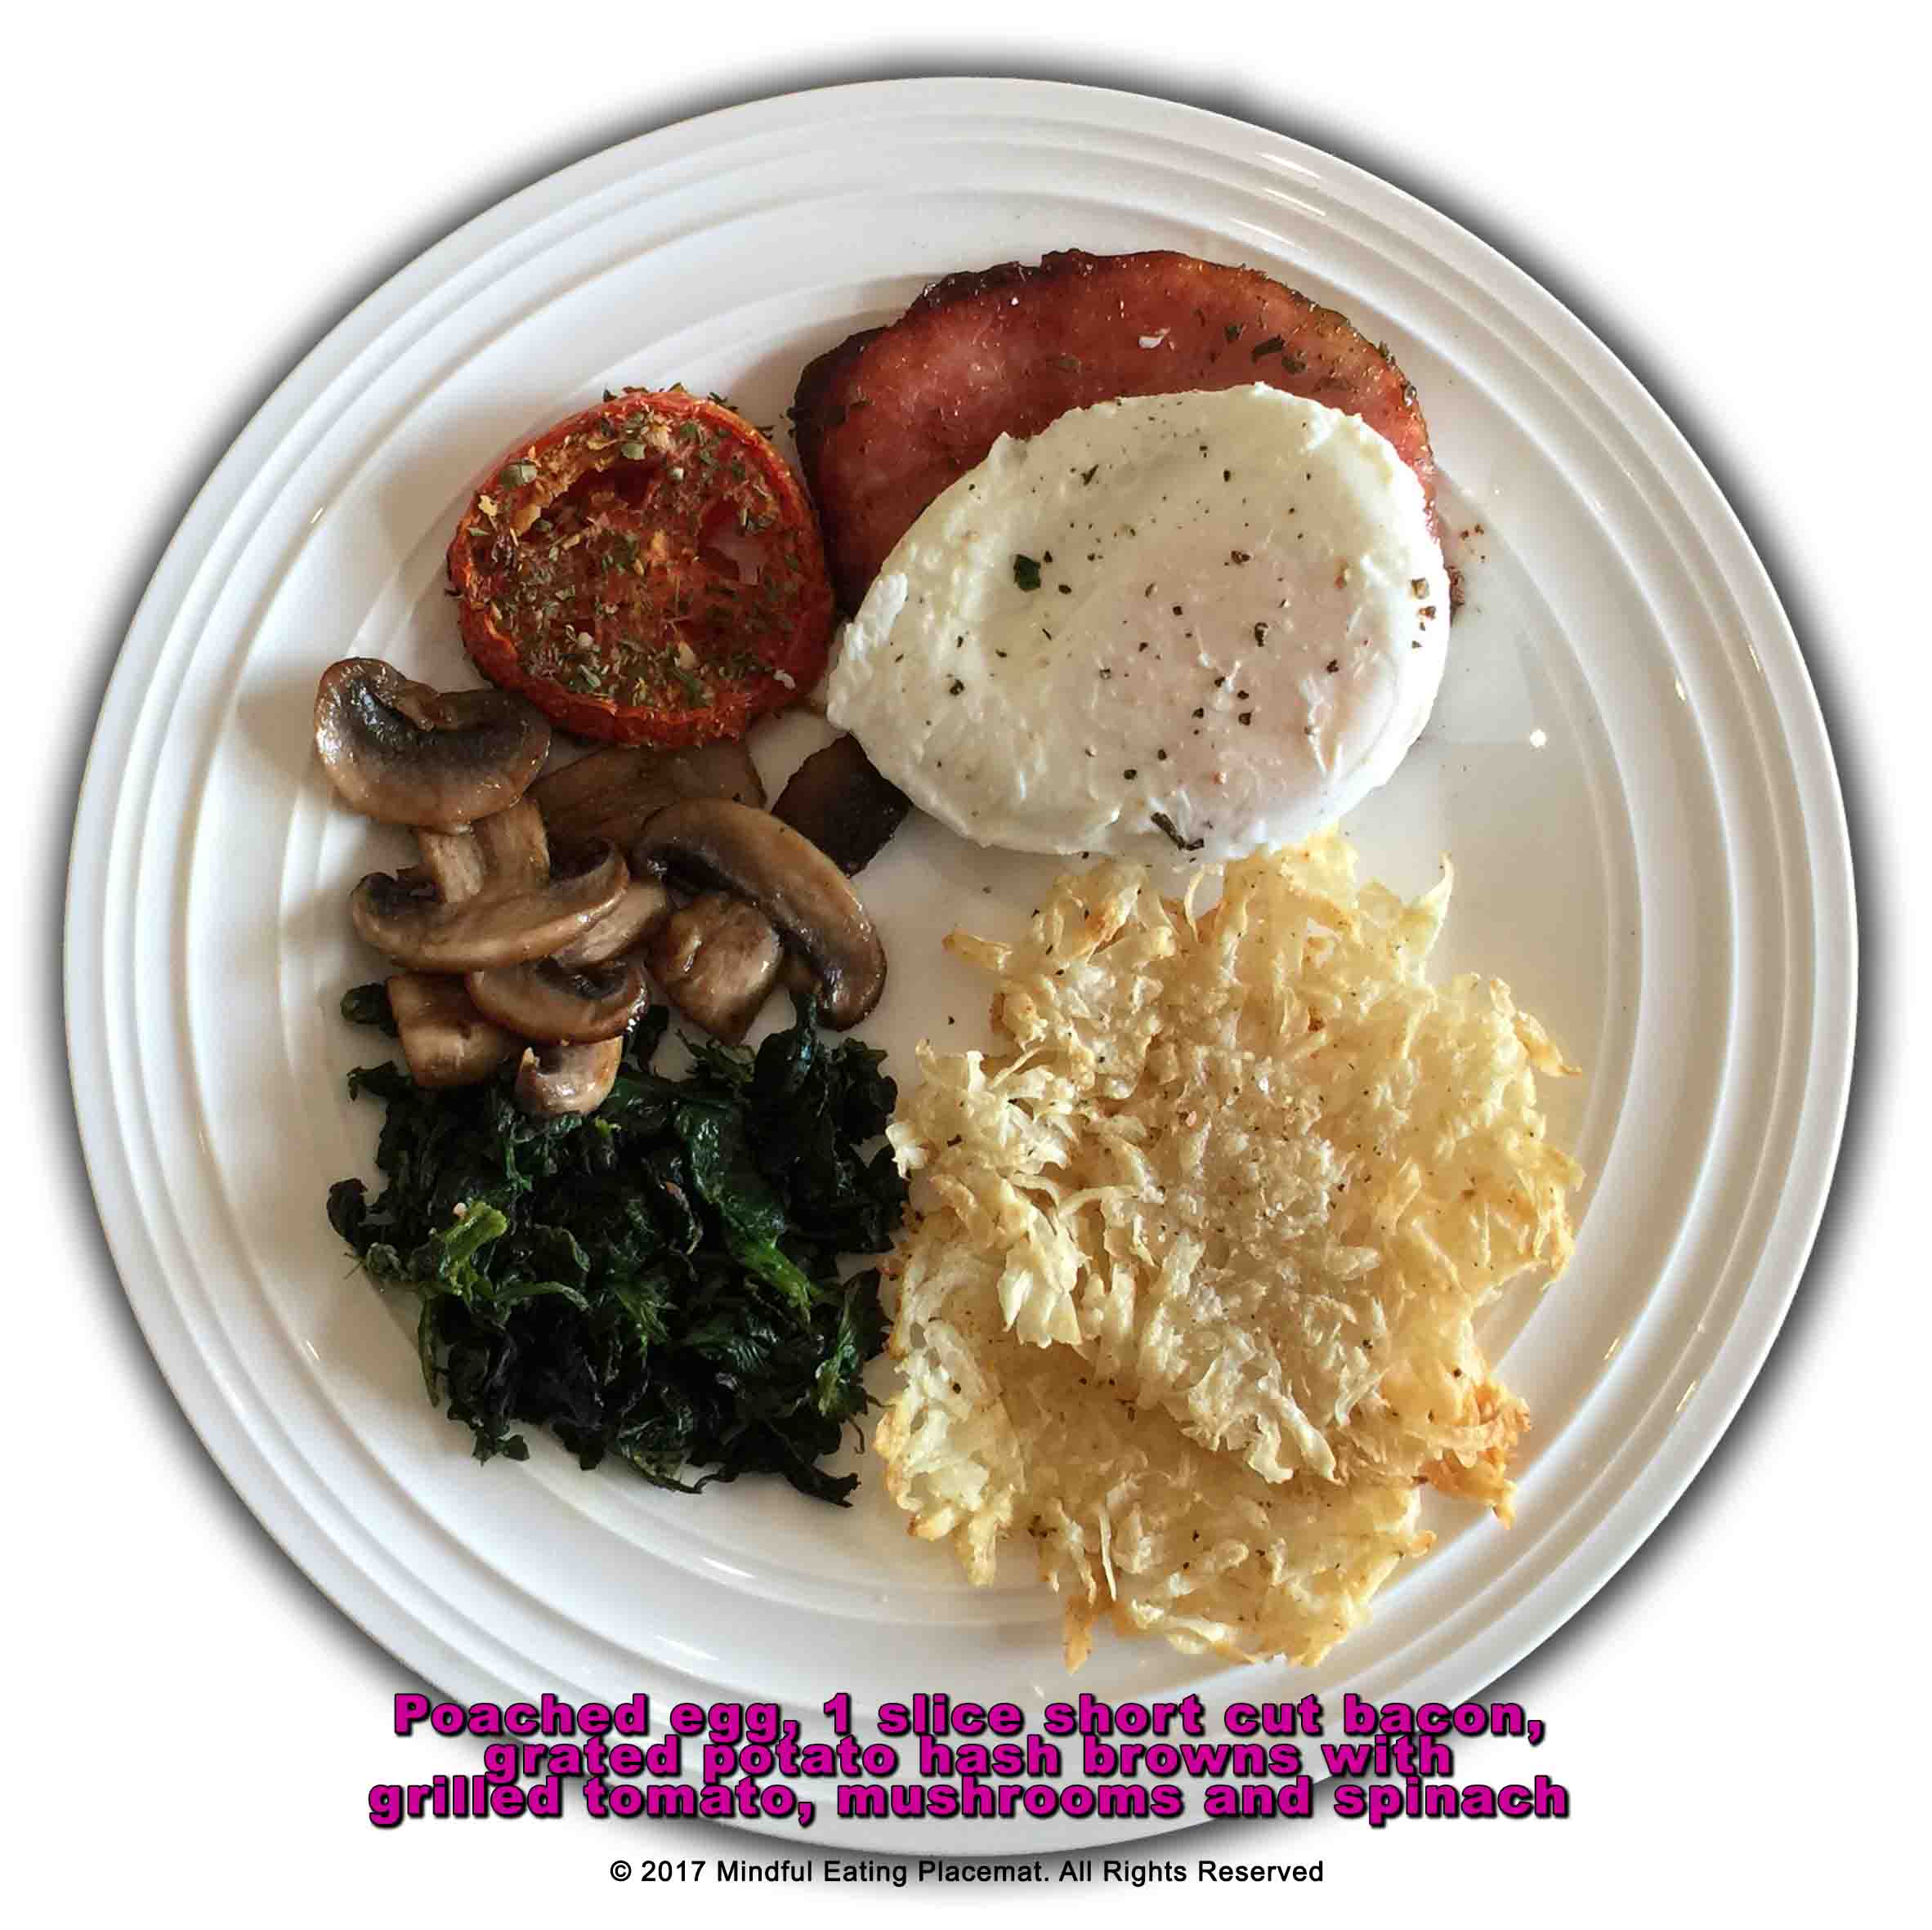 Poached egg, slice bacon, homemade hashbrowns with tomato, mushrooms and spinach